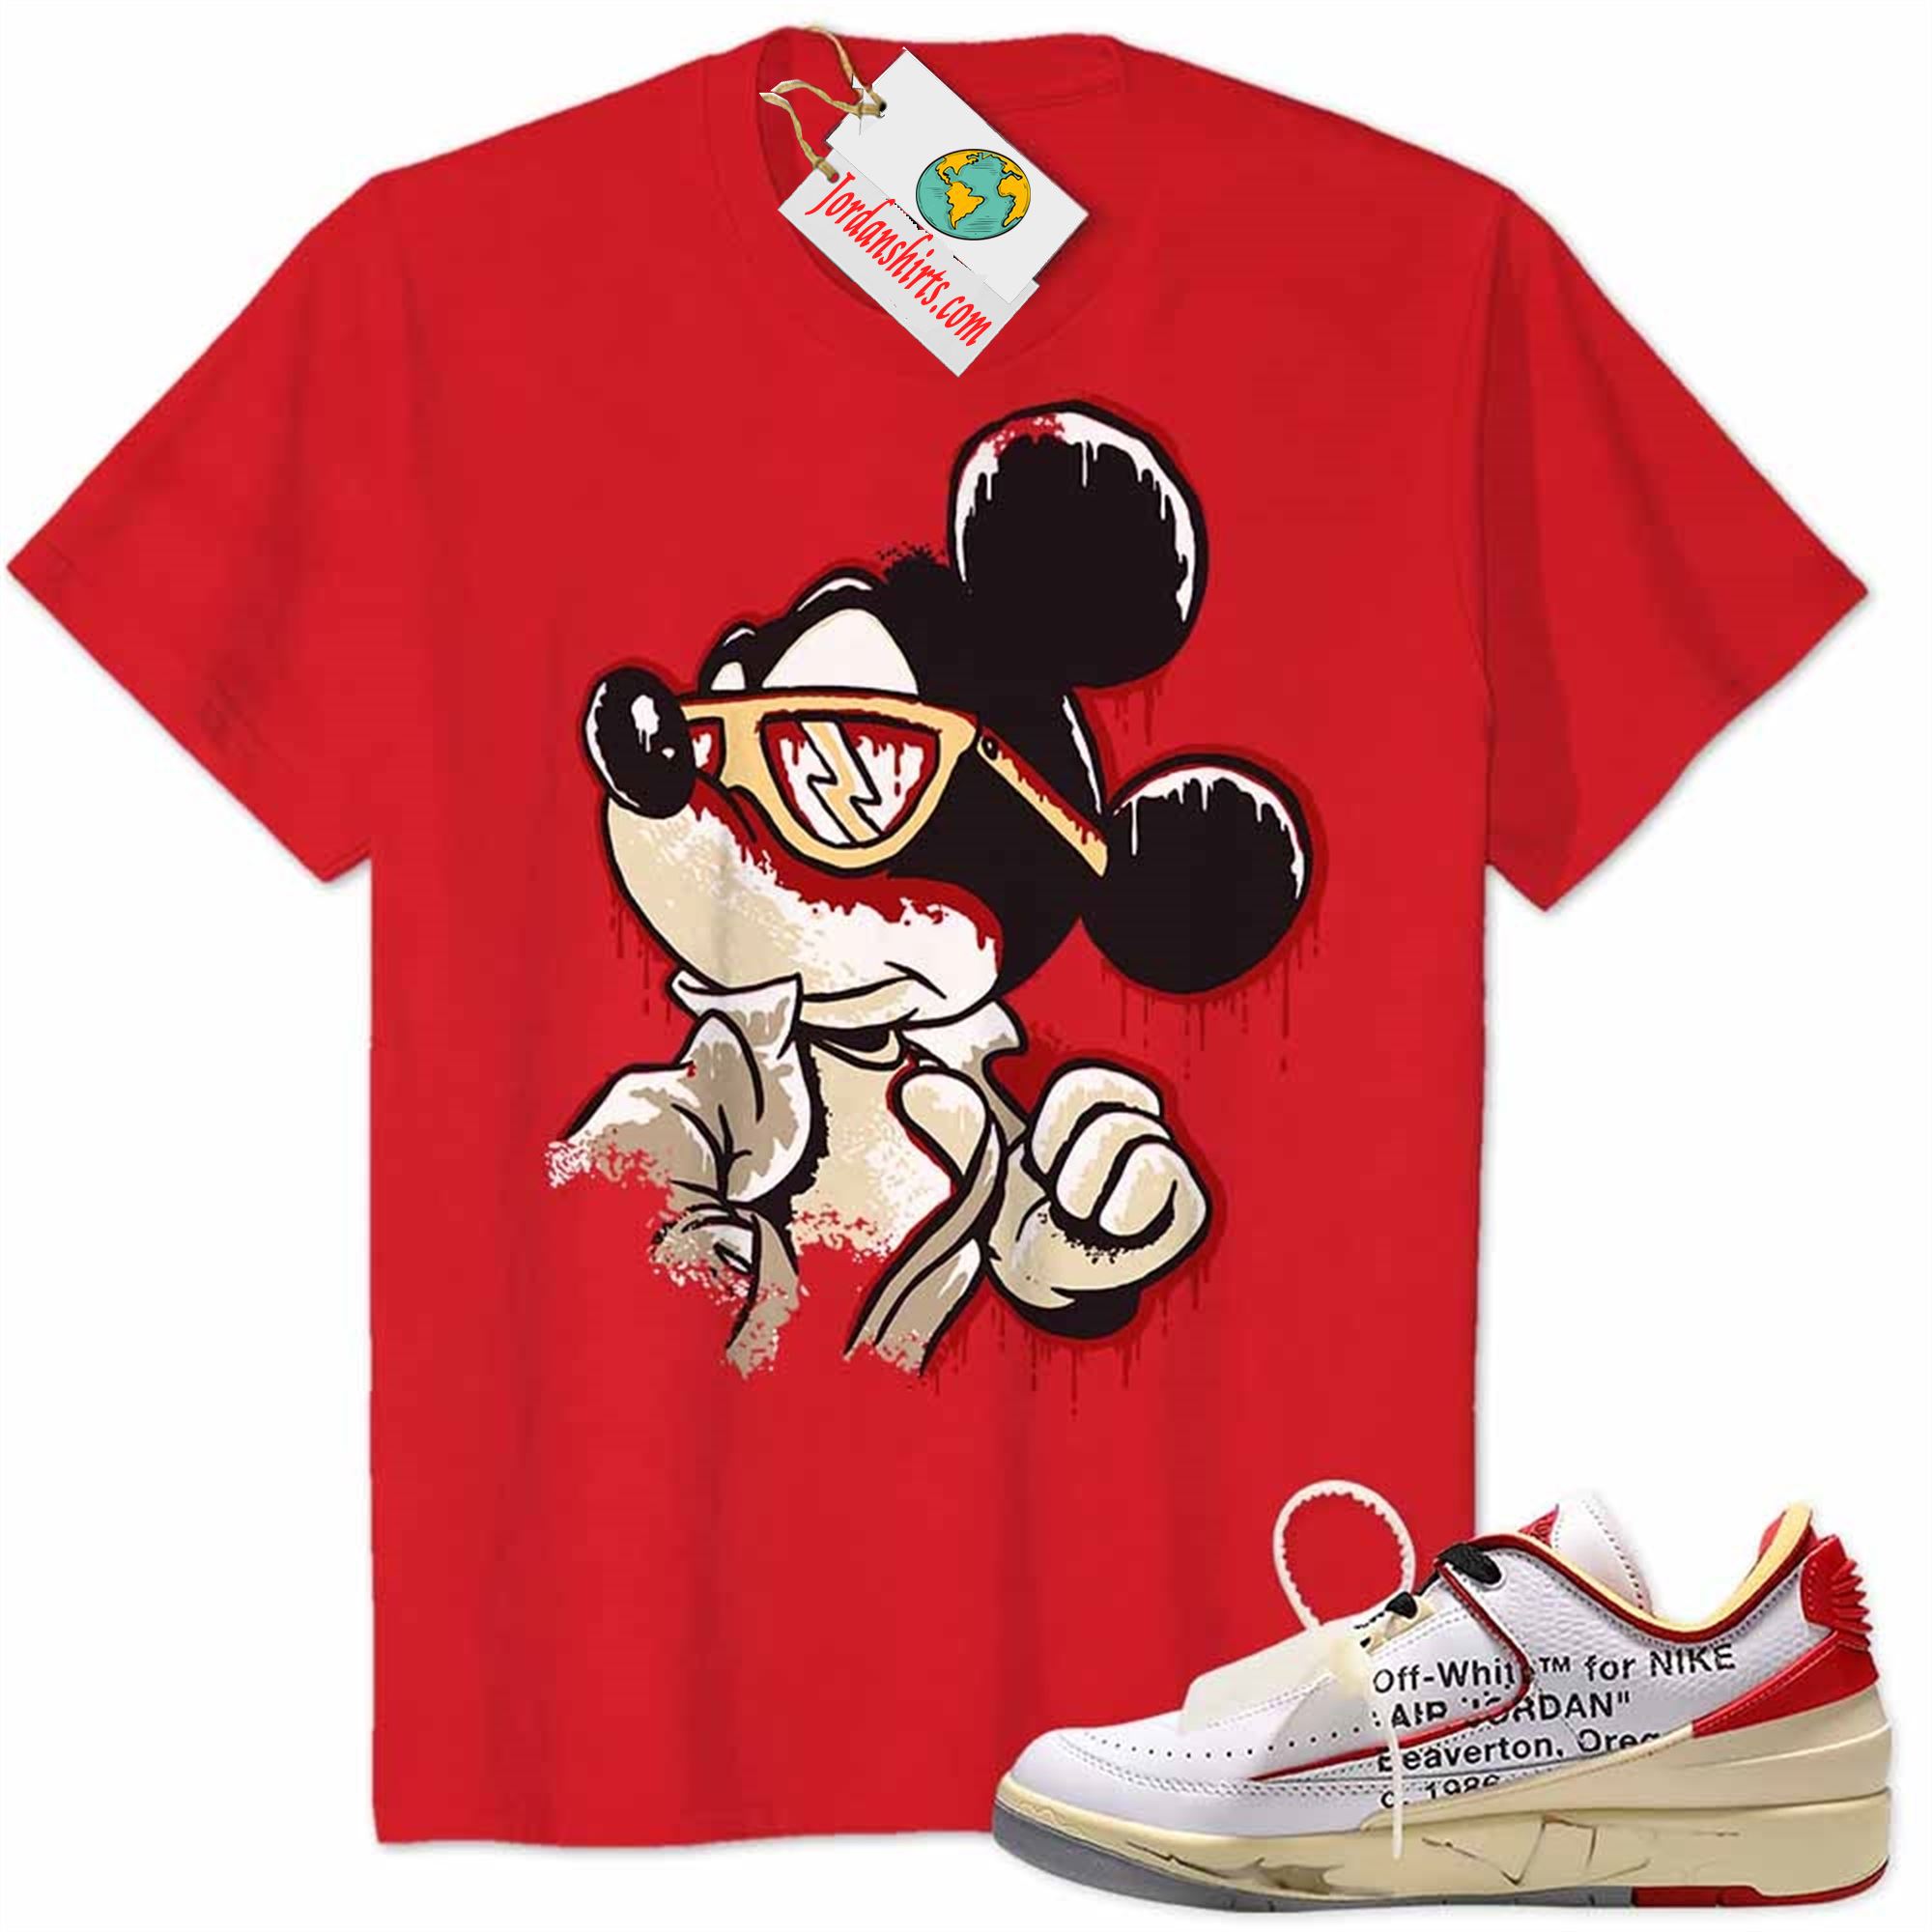 Jordan 2 Shirt, Mickey Dripping Graphic Red Air Jordan 2 Low White Red Off-white 2s Plus Size Up To 5xl